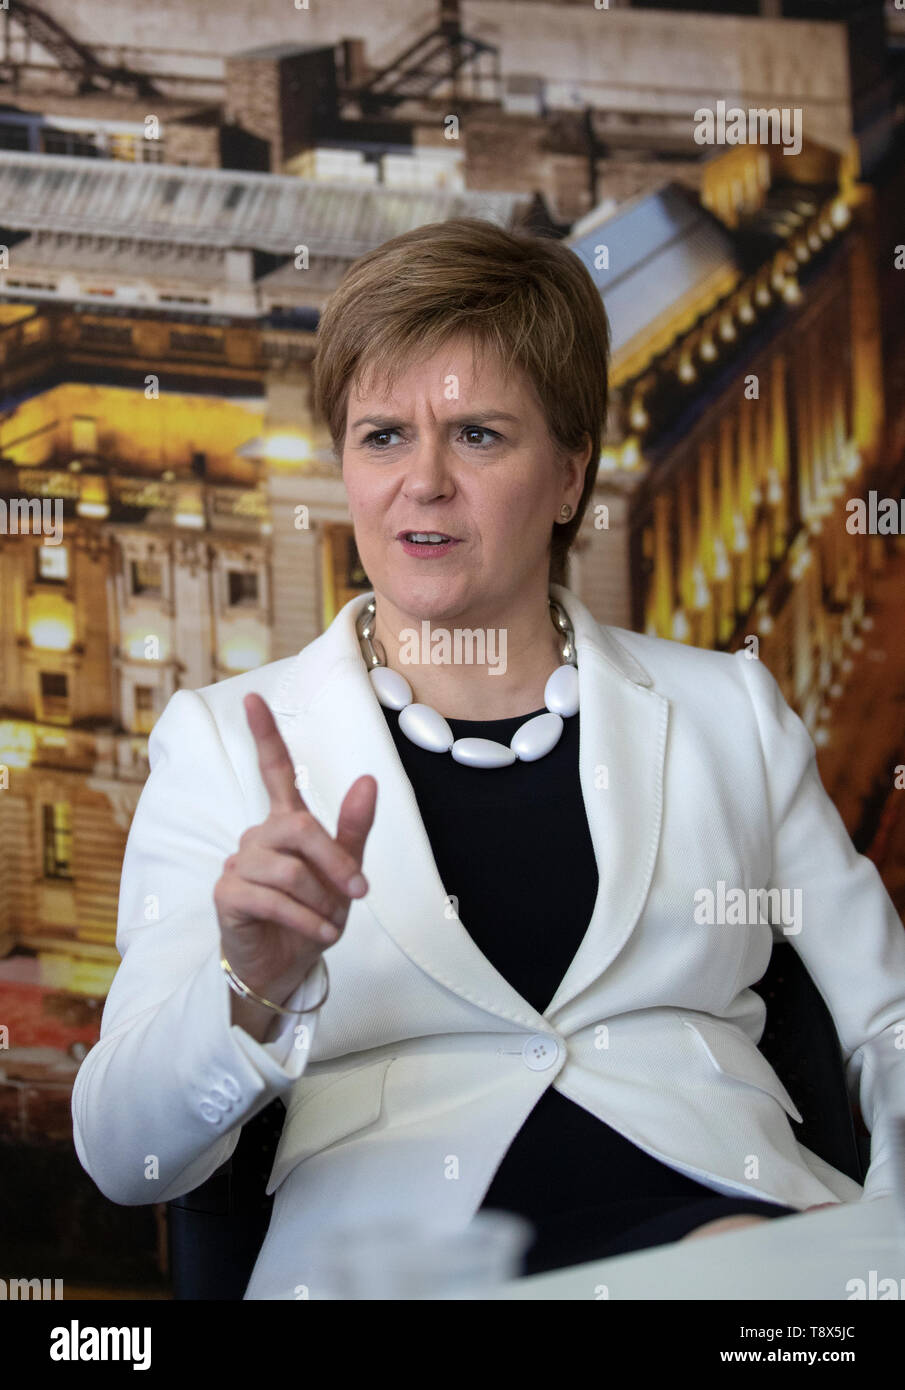 First Minister Nicola Sturgeon during a visit to Tay House, Glasgow, where she met with EU nationals working at the University of Glasgow ahead of next week's European election. Stock Photo